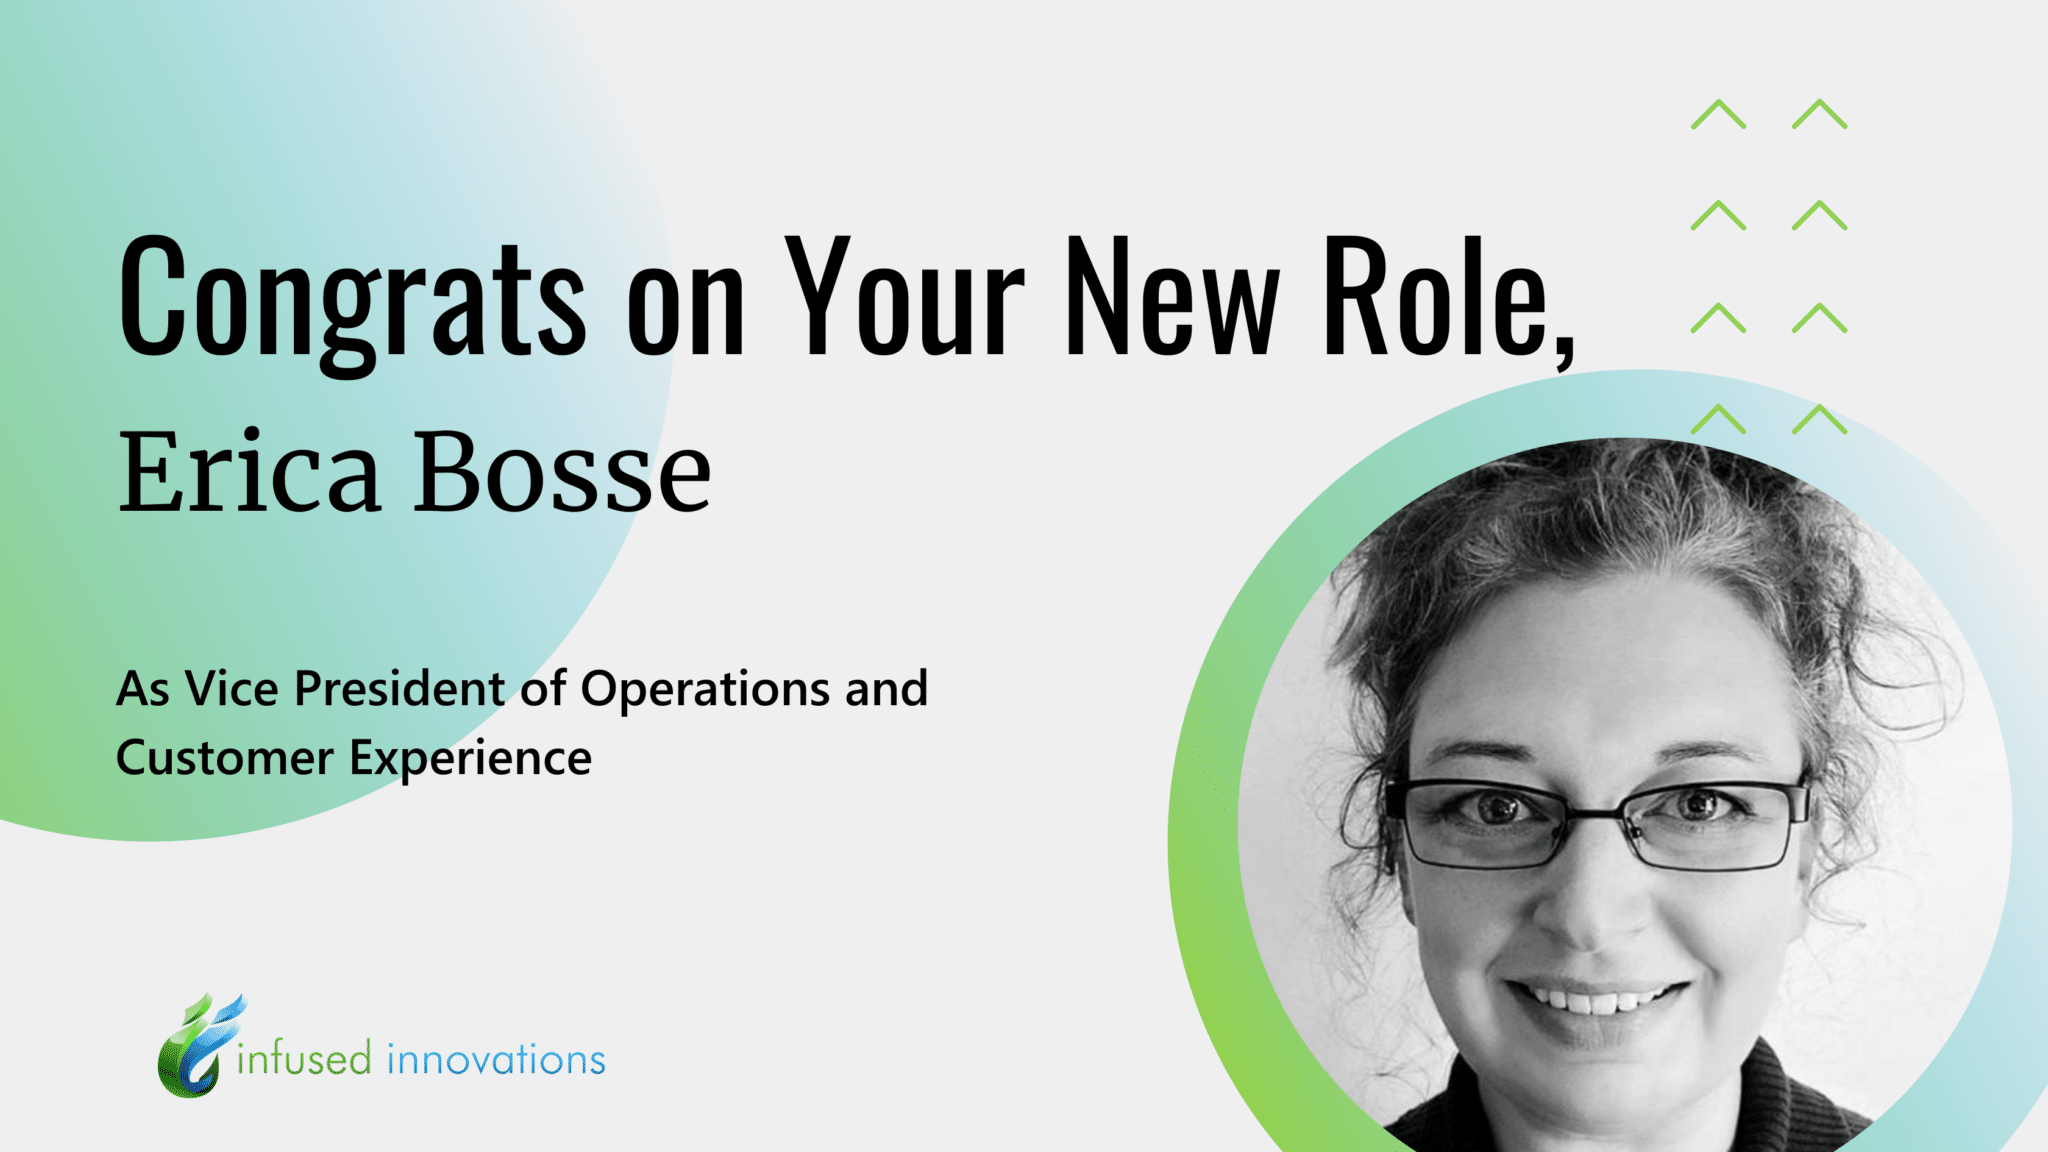 An image celebrating Erica Bosse's success as the VP of Operations and Customer Experience